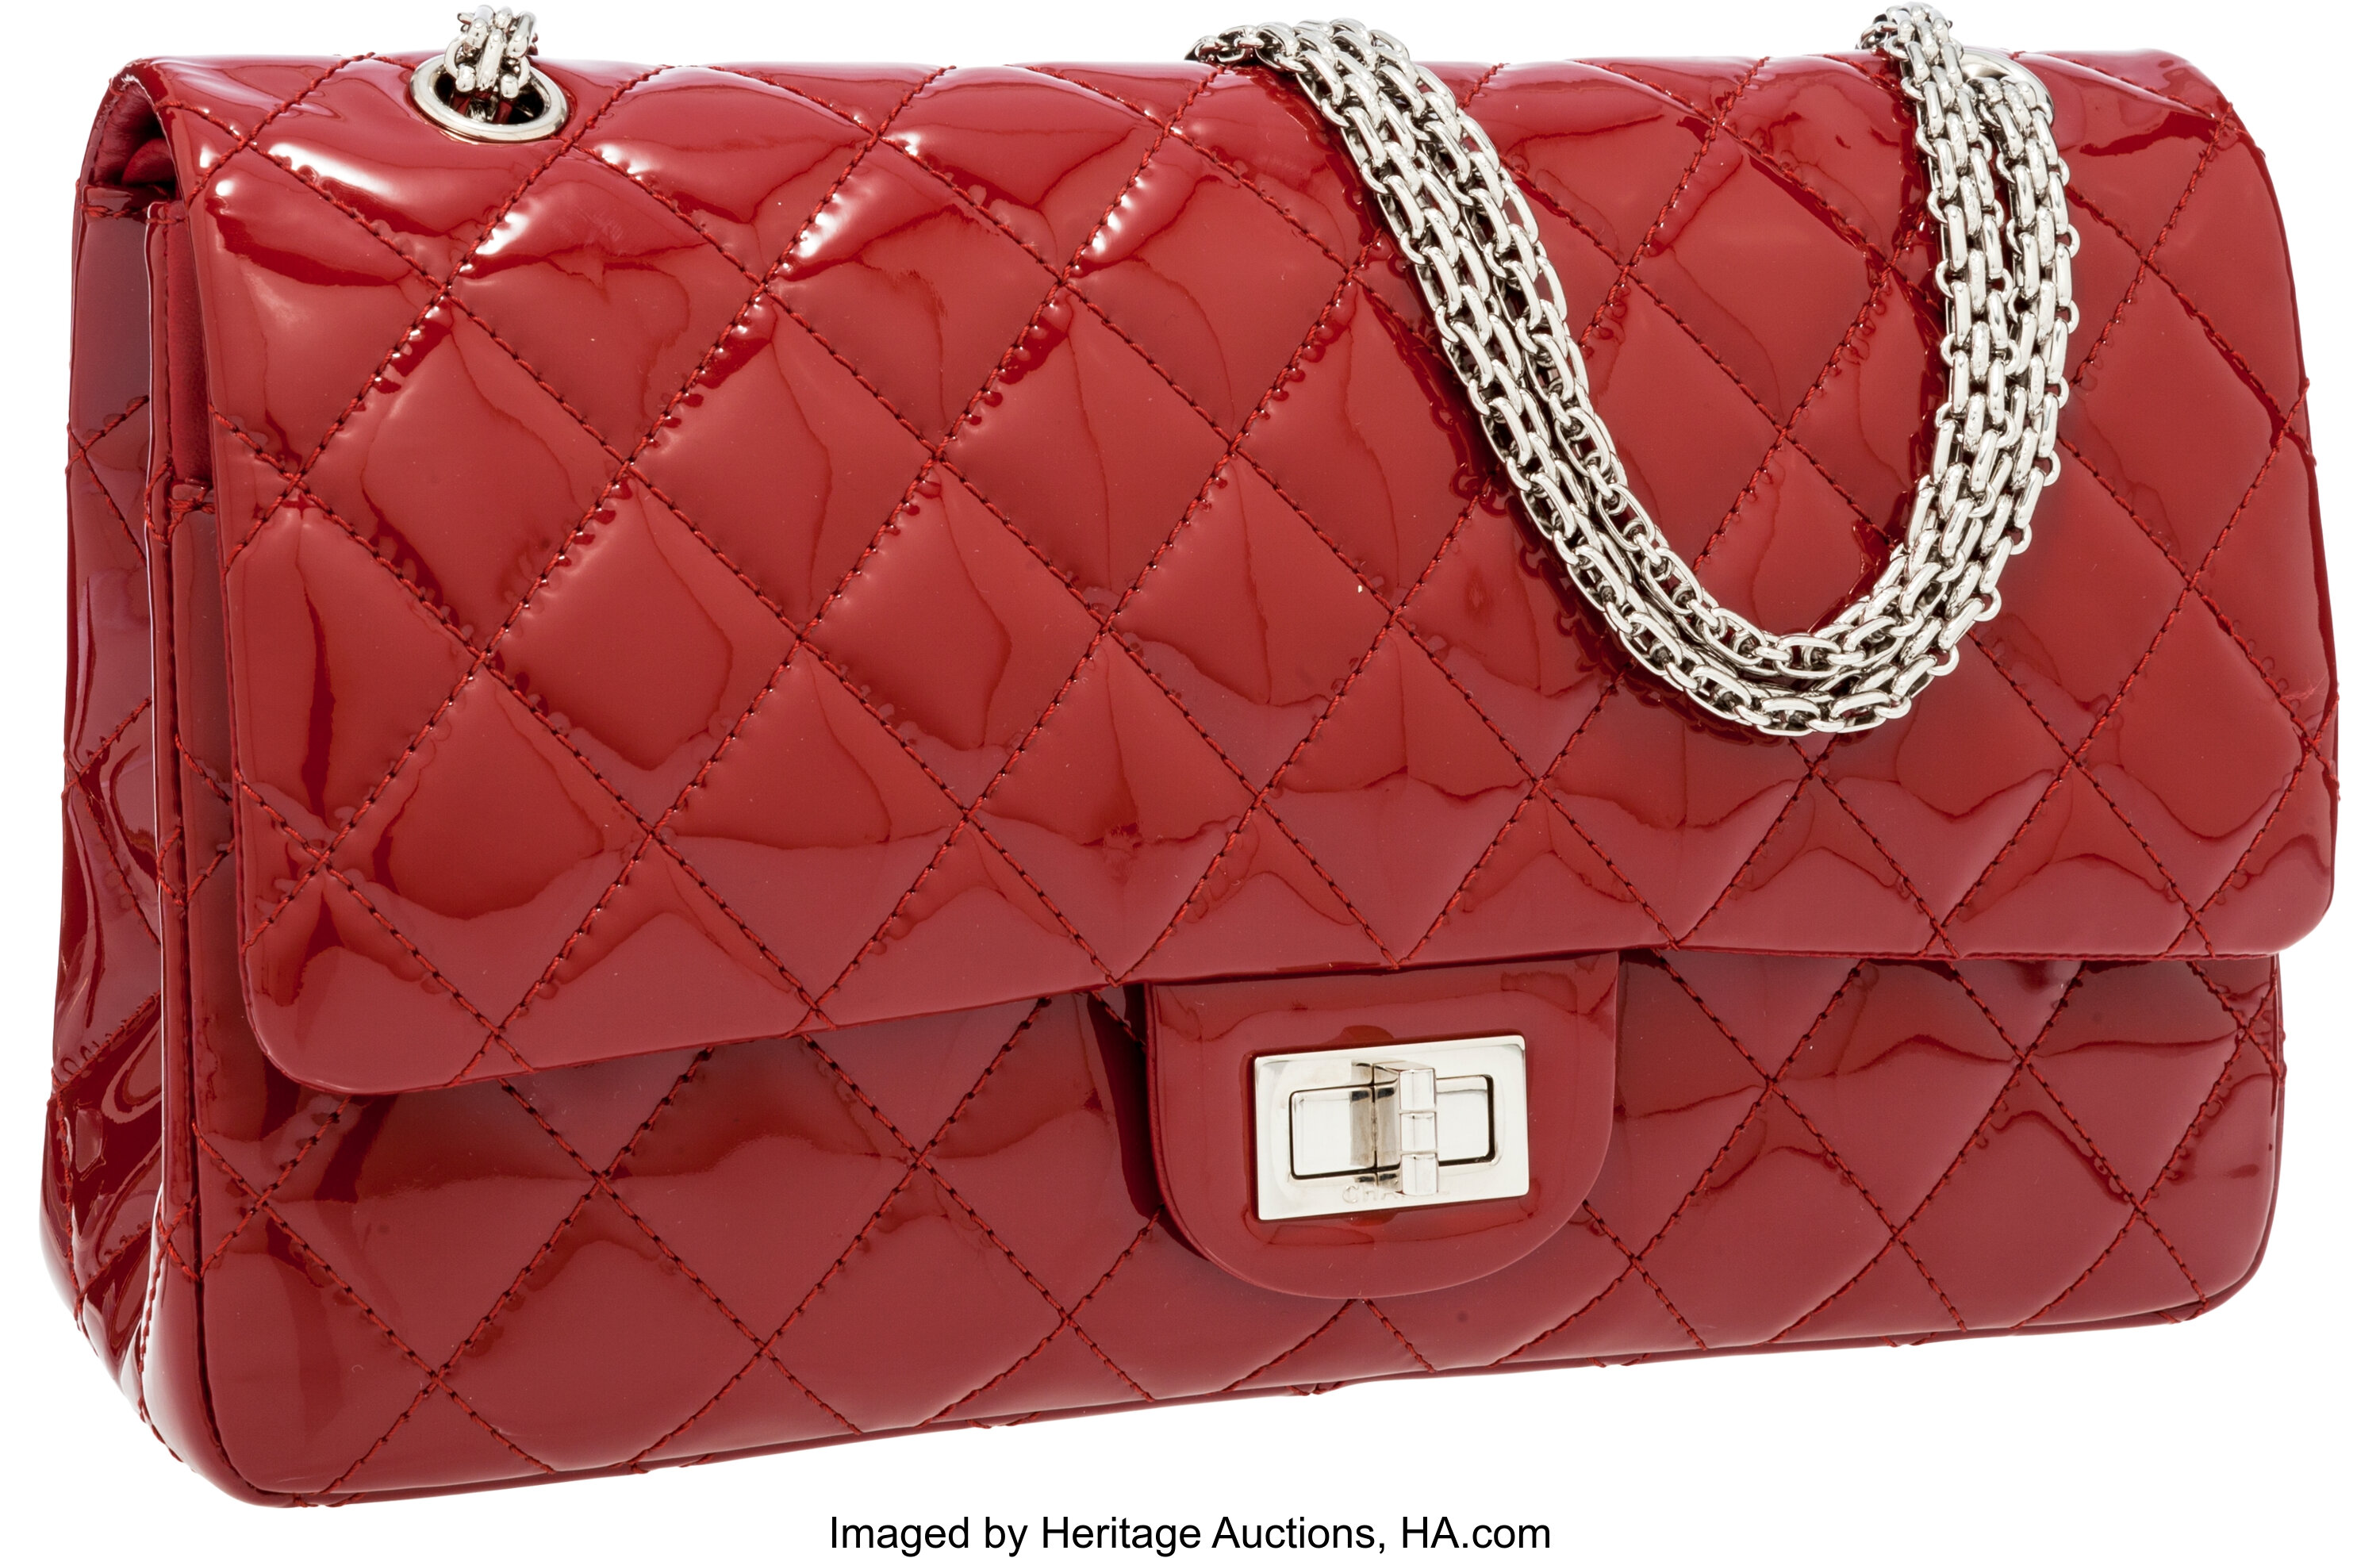 CHANEL Red Quilted Leather Flap Bag with Pearl and Chain Strap